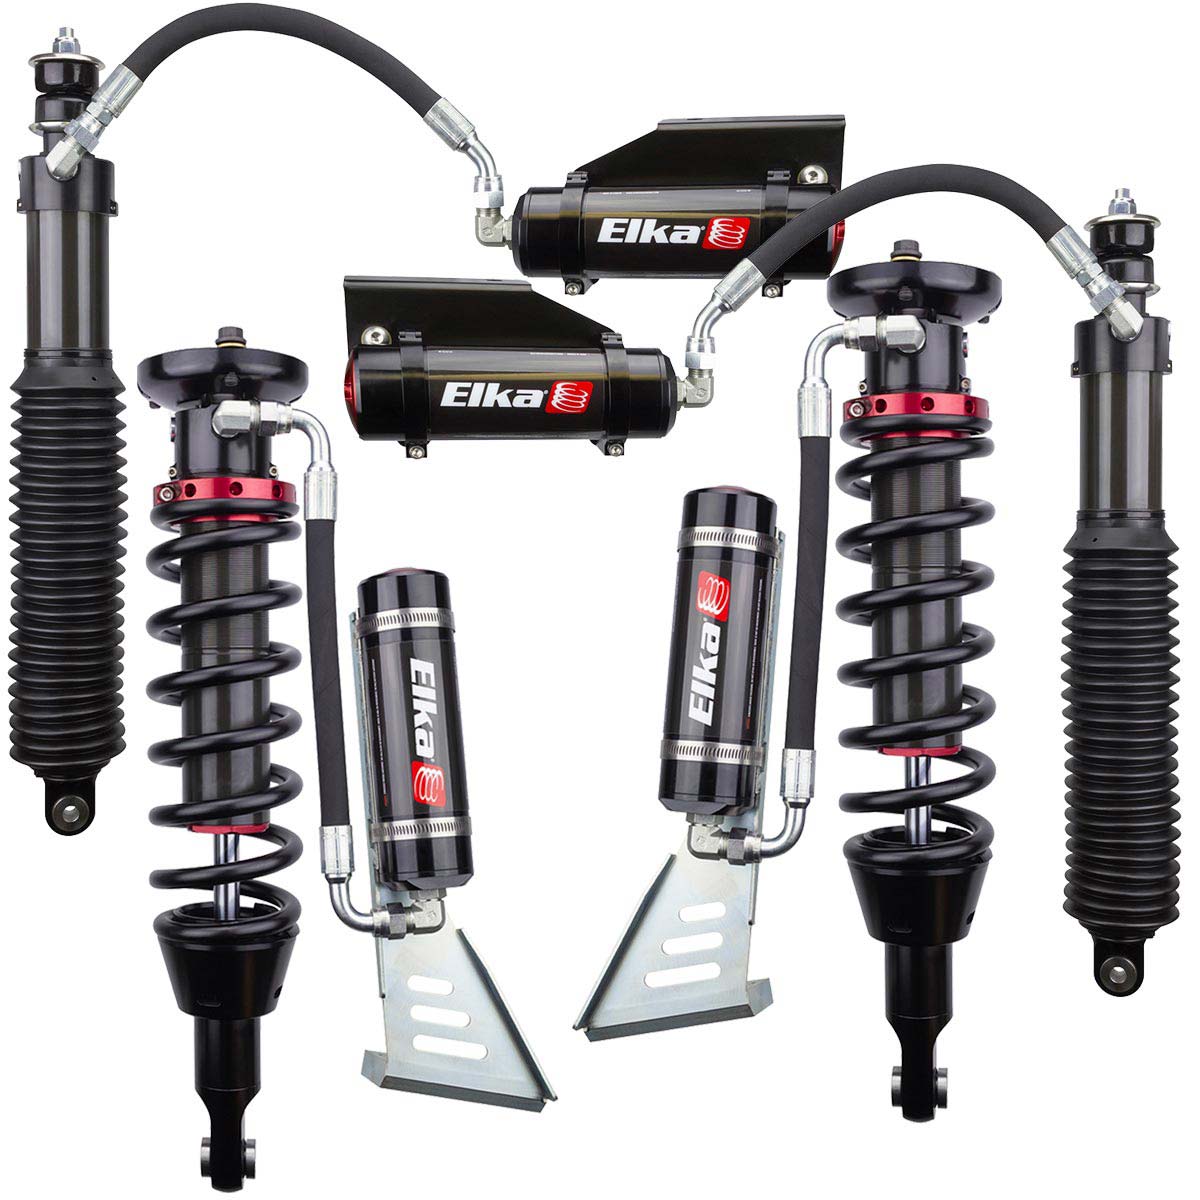 Elka 2.5 RESERVOIR FRONT & REAR SHOCKS KIT for TOYOTA 4RUNNER, 2010 to 2020 (non-KDSS) (2 in. to 3 in. lift)